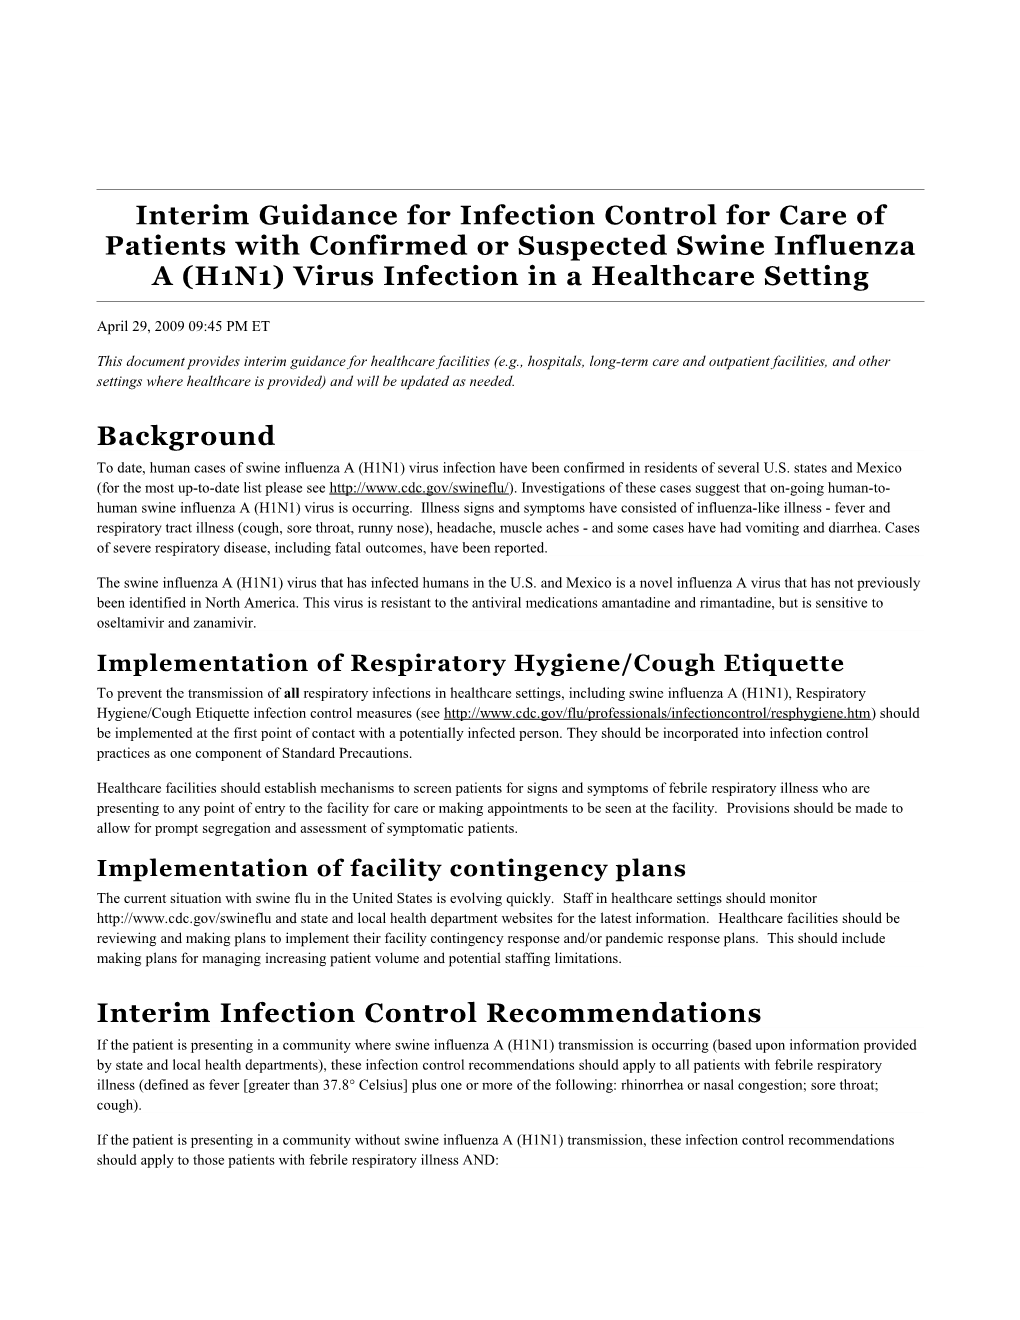 Interim Guidance for Infection Control for Care of Patients with Confirmed Or Suspected